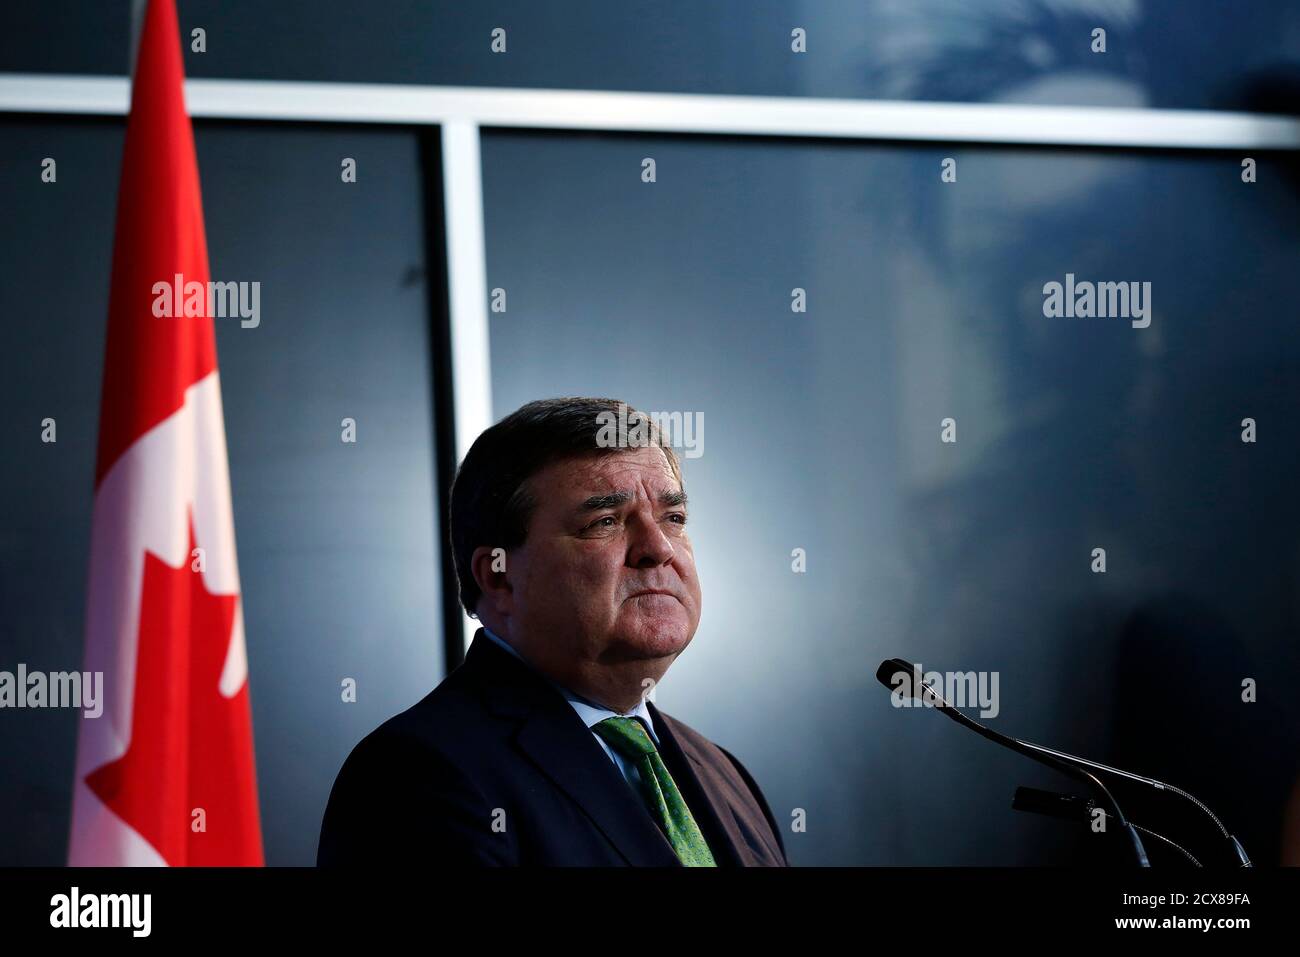 Canada's Finance Minister Jim Flaherty listens to a question during a news conference in Ottawa March 1, 2013. The slowing Canadian economy means the government will have lower revenues than it initially forecast as it draws up the next budget, which is due soon, Flaherty said on Friday. REUTERS/Chris Wattie (CANADA - Tags: POLITICS BUSINESS) Stock Photo